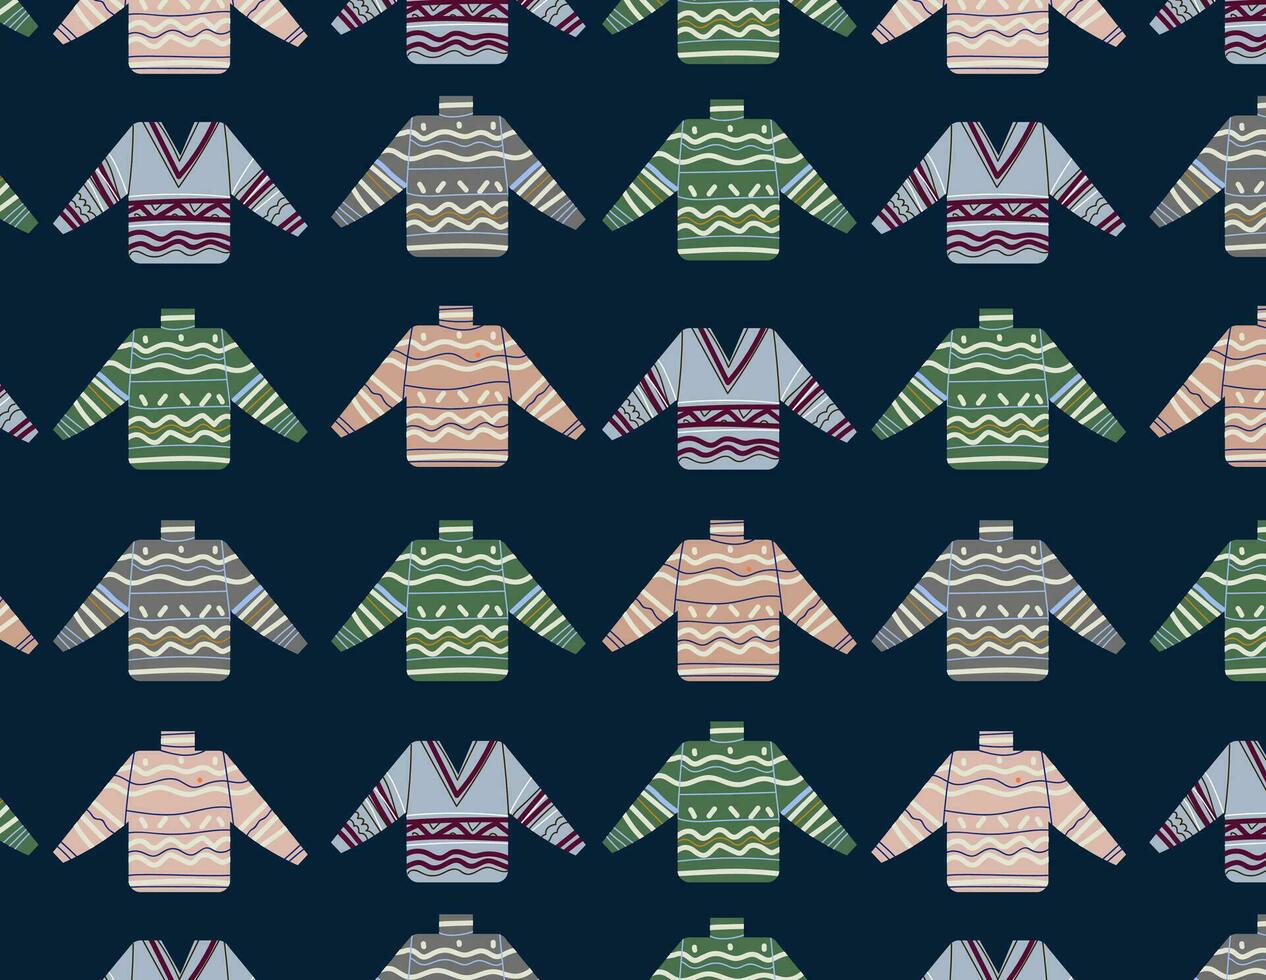 https://static.vecteezy.com/system/resources/previews/032/167/065/non_2x/knitted-pullover-seamless-pattern-vector.jpg